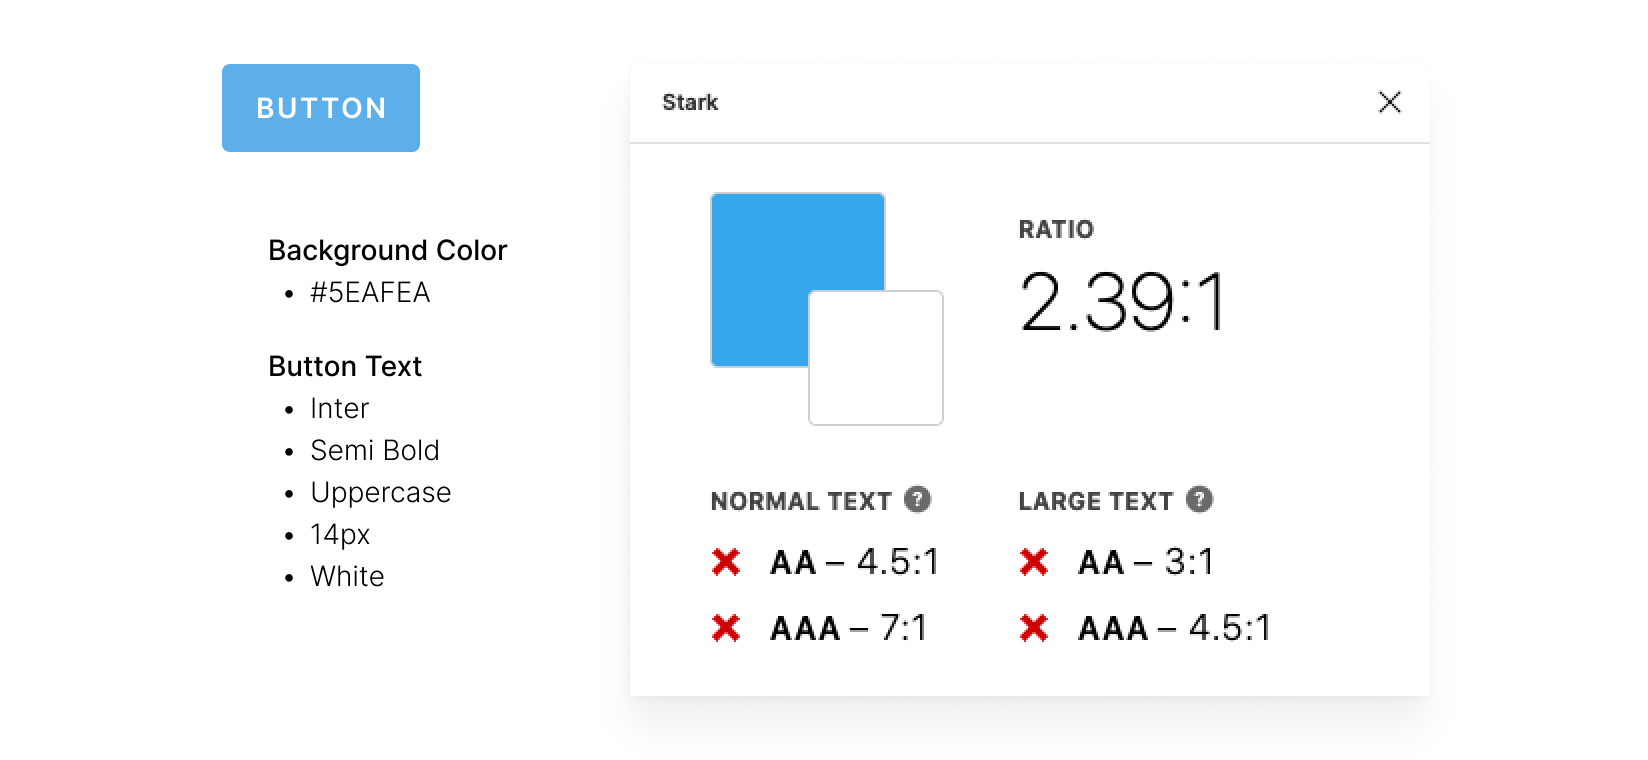 The Stark plugin in Figma, showing this combination of sky blue and white has a contrast ratio of 2.39:1. This ratio does not pass any compliance levels, neither AA or AAA.